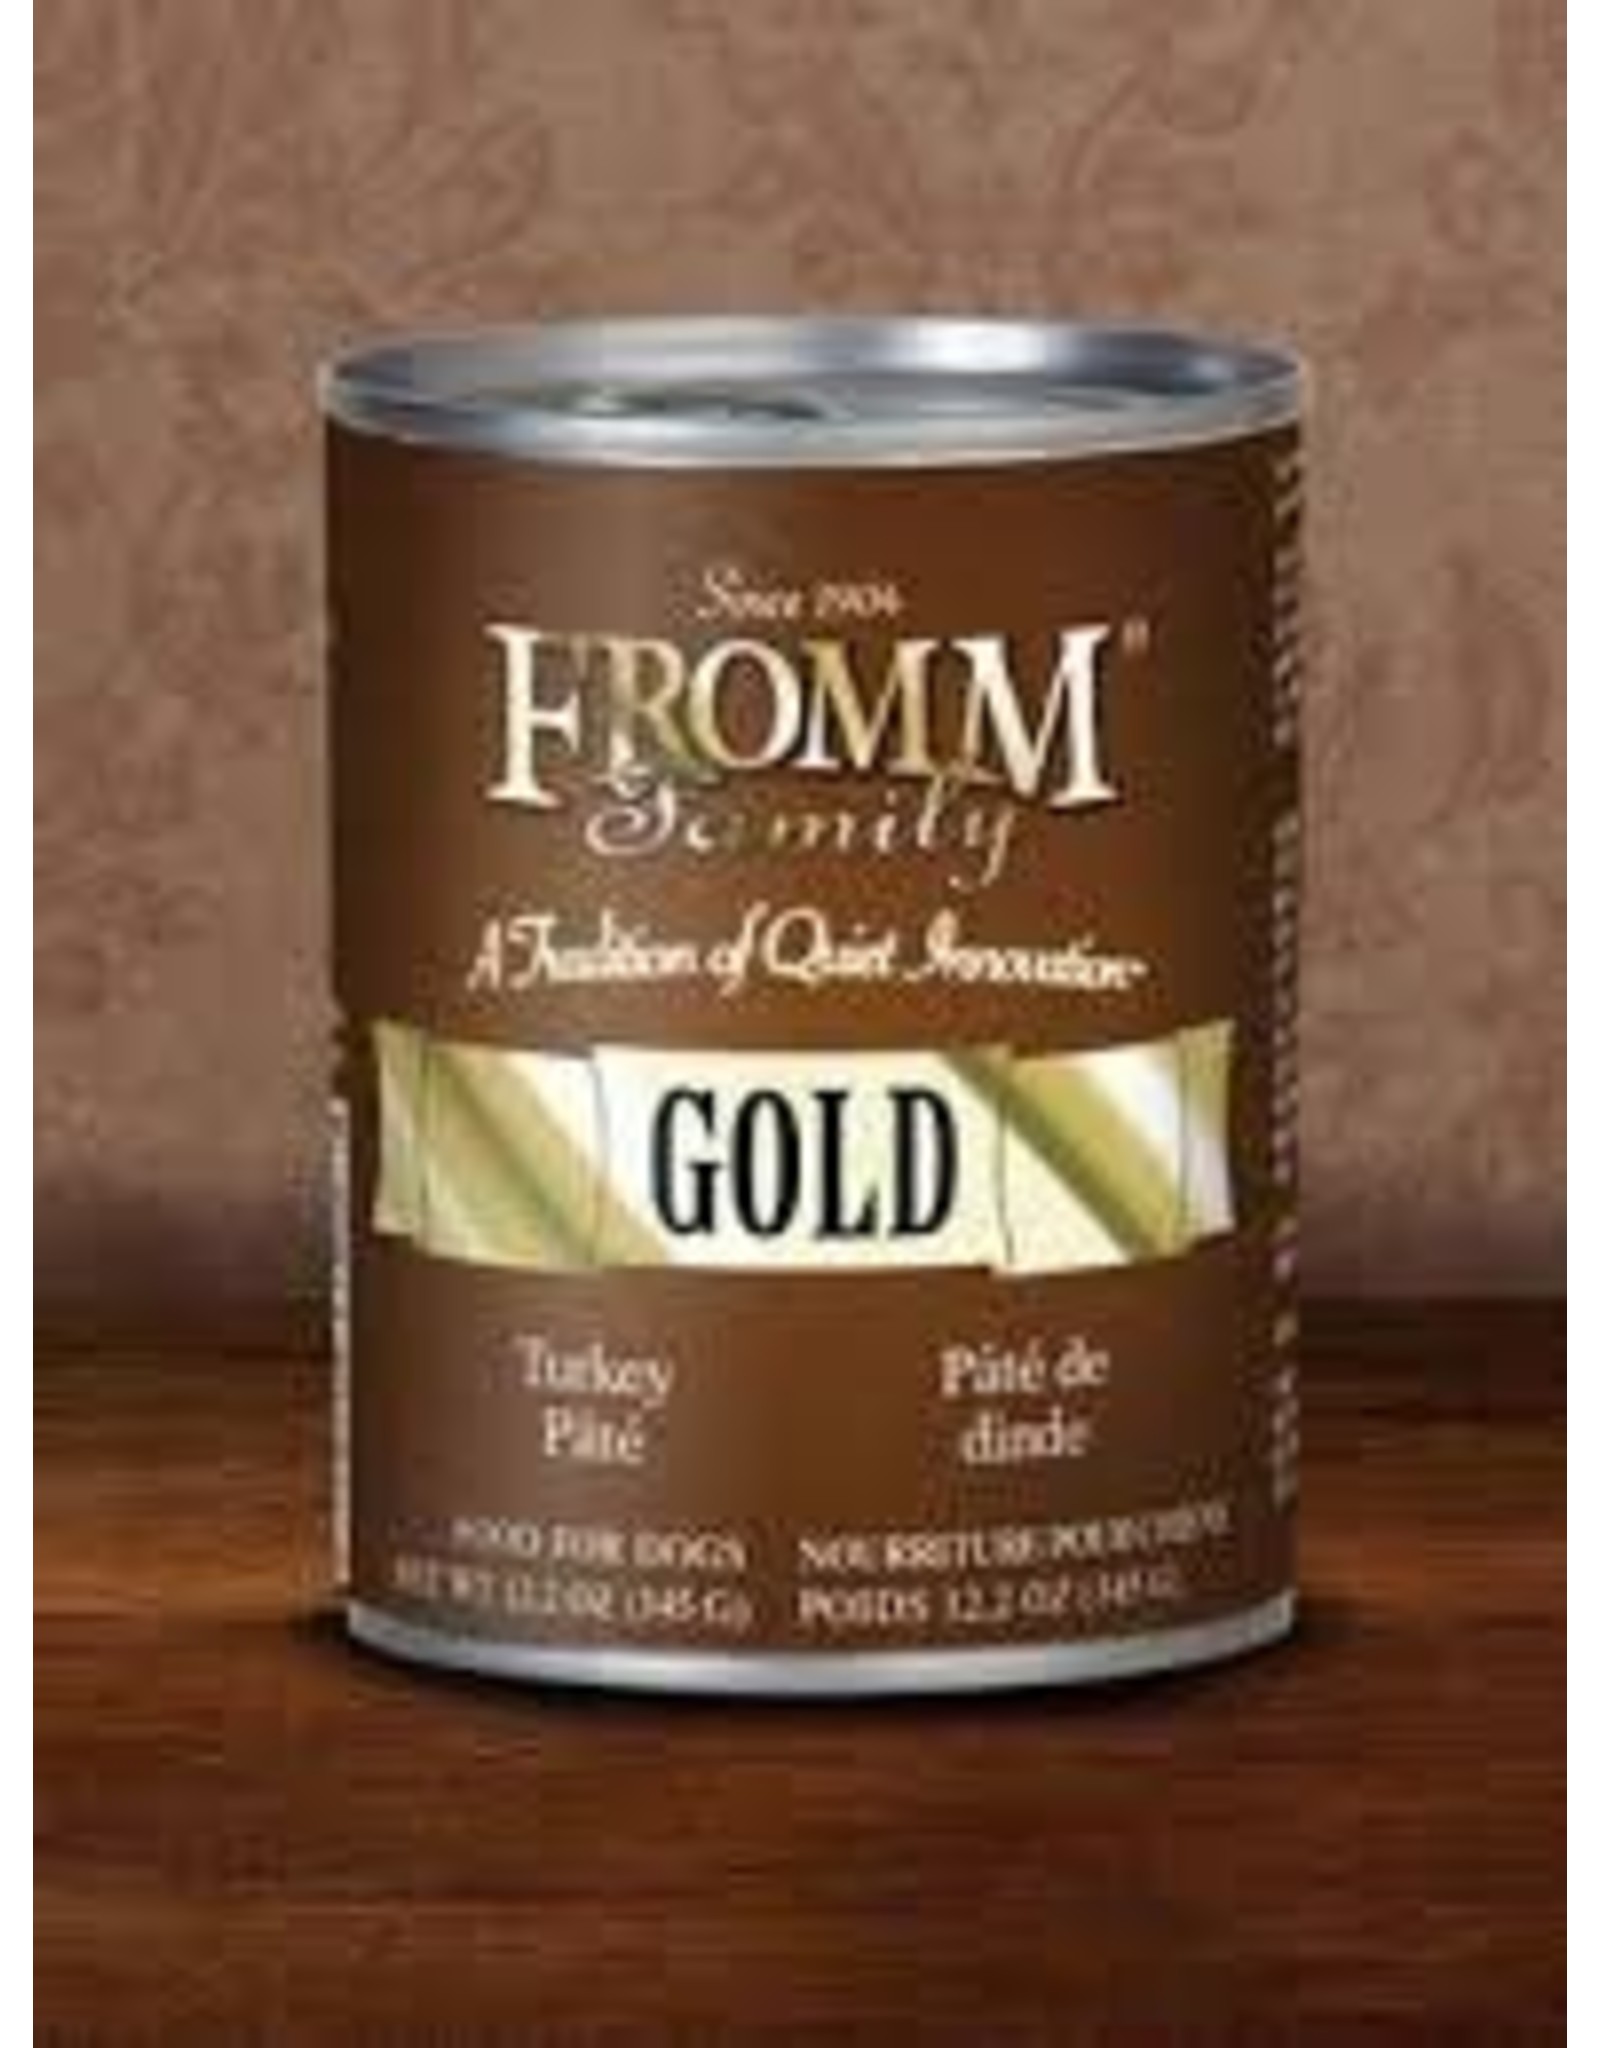 FROMM FROMM  GOLD TURKEY PATE 12.2 OZ